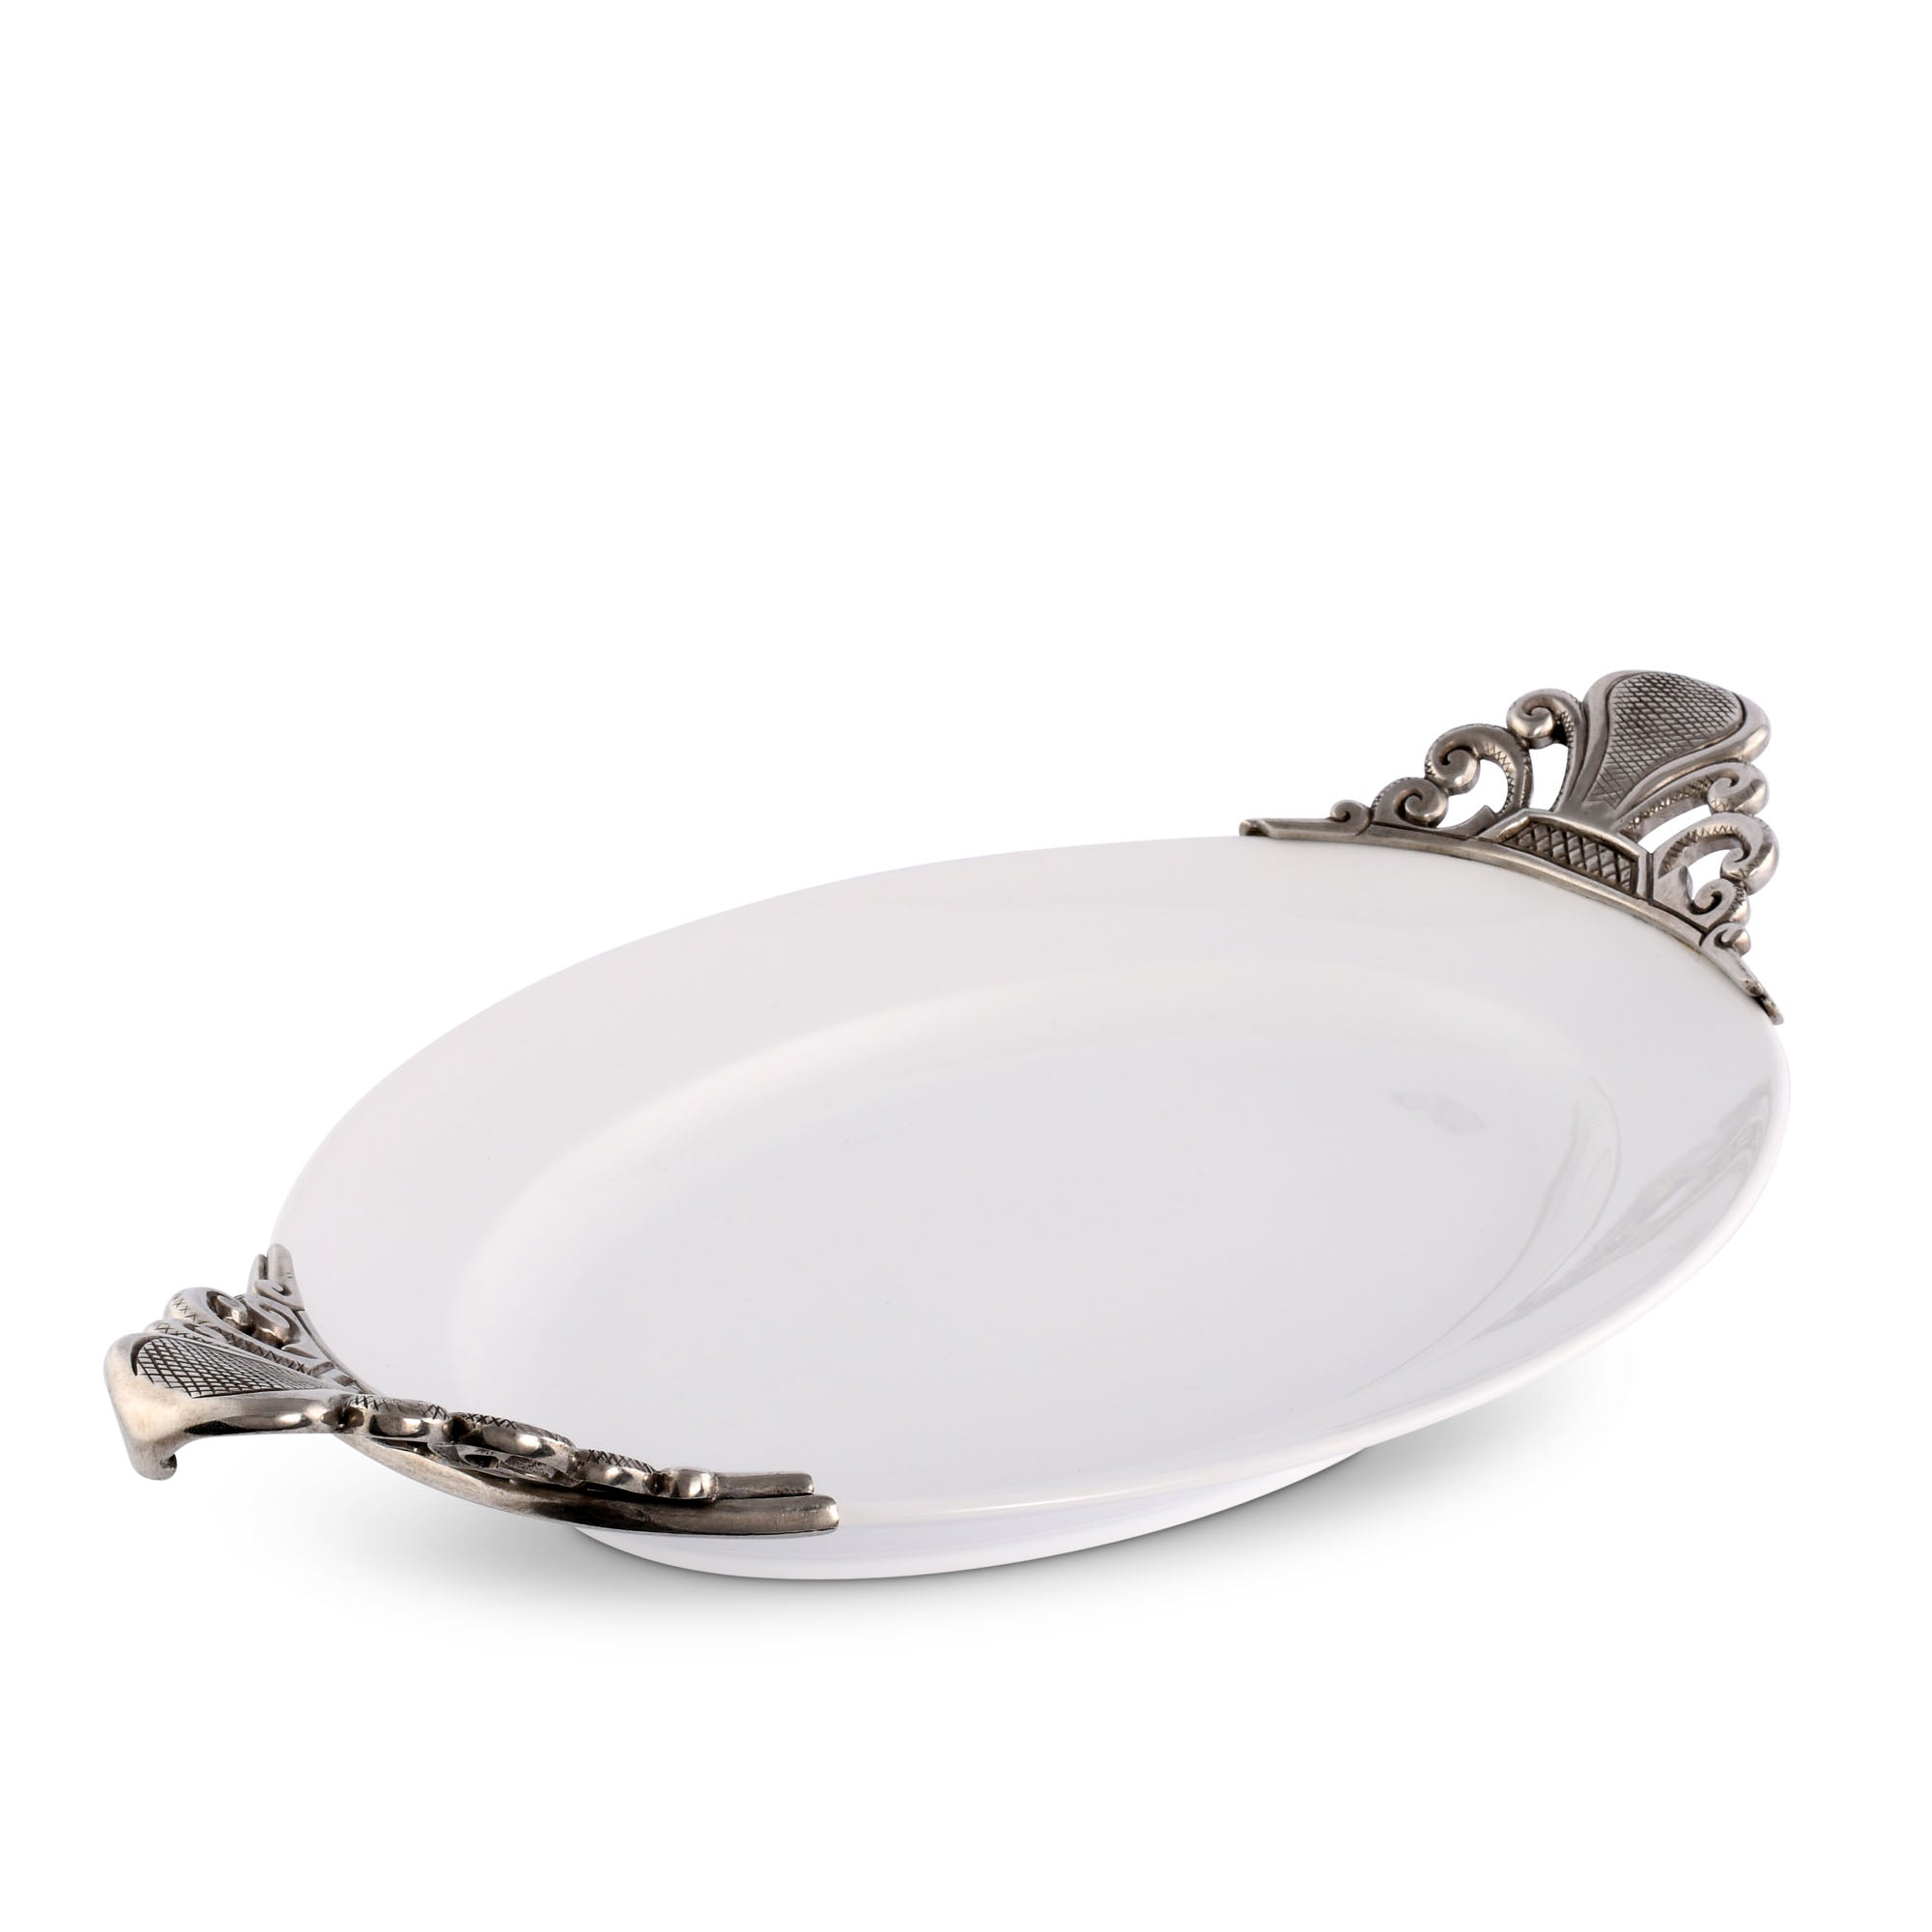 Vagabond House Provencal Serving Tray Product Image